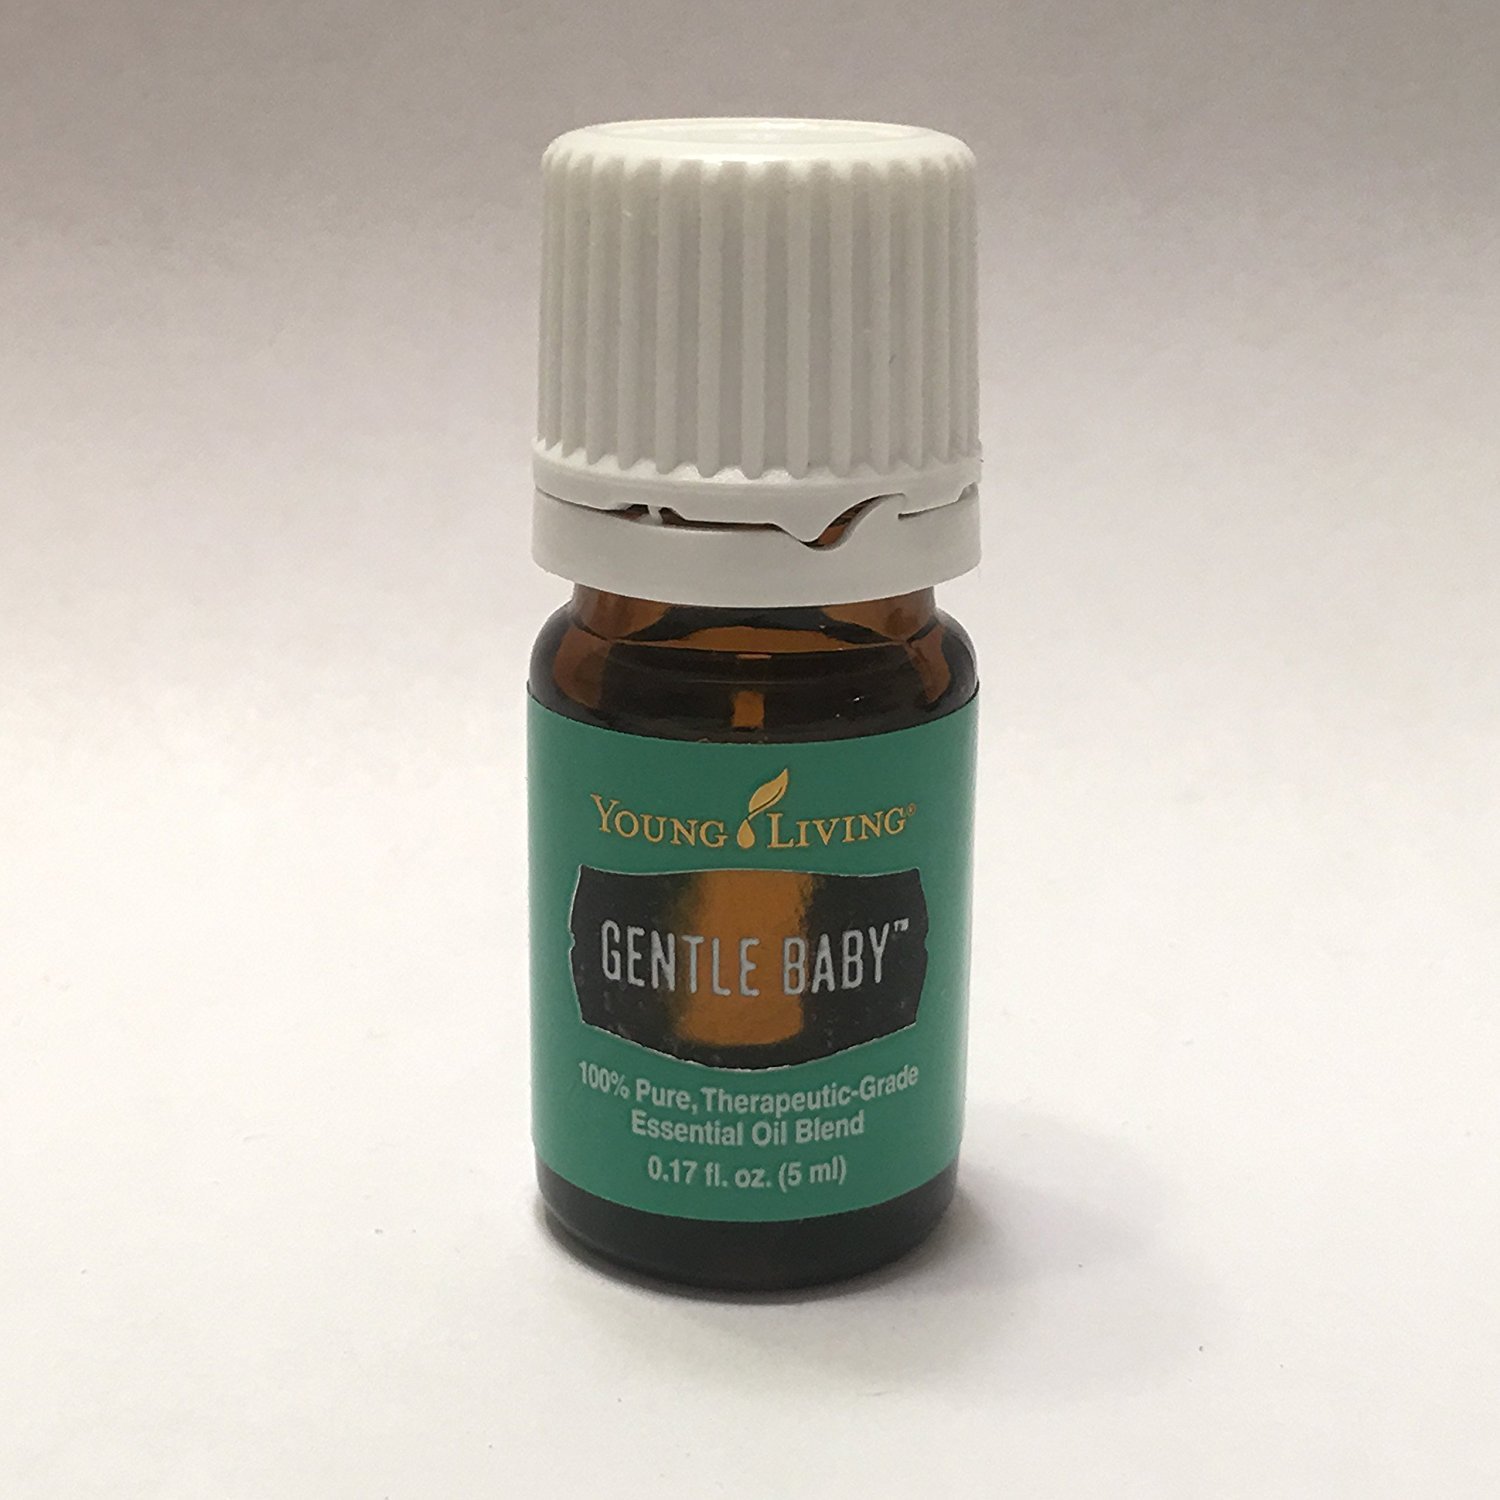 Gentle Baby 5ml Essential Oils by Young Living Essential Oils